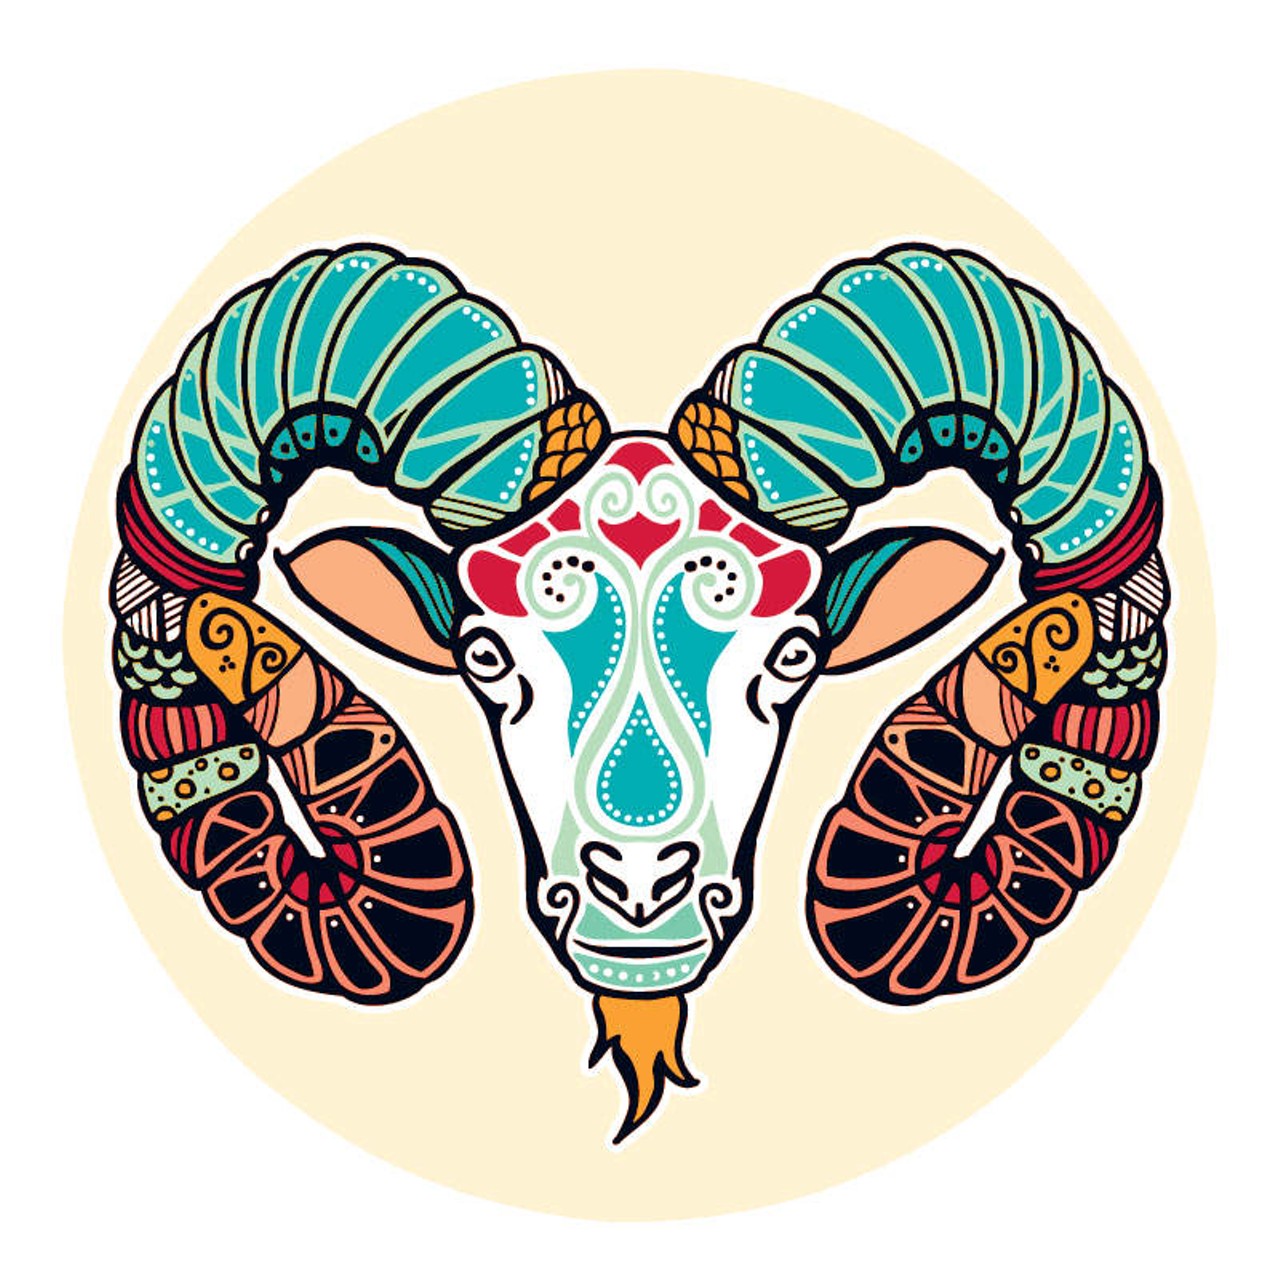 ARIES (March 21- April 20):
There's no way to make sense of this. In the middle of a typhoon making sense of anything is oxymoronic. Finding new ways to remain centered in the eye of the storm is vital. Those of you who have stopped making excuses are way better off than those of you who are still using the blame game to obscure the truth. What came to life four or five years ago has yet to manifest fully. The power of intent doesn't work when your motives are murky or ego-based. Your blind spots look like a field of polka dots! Finding clarity at a time like this will take a lot more soul searching.